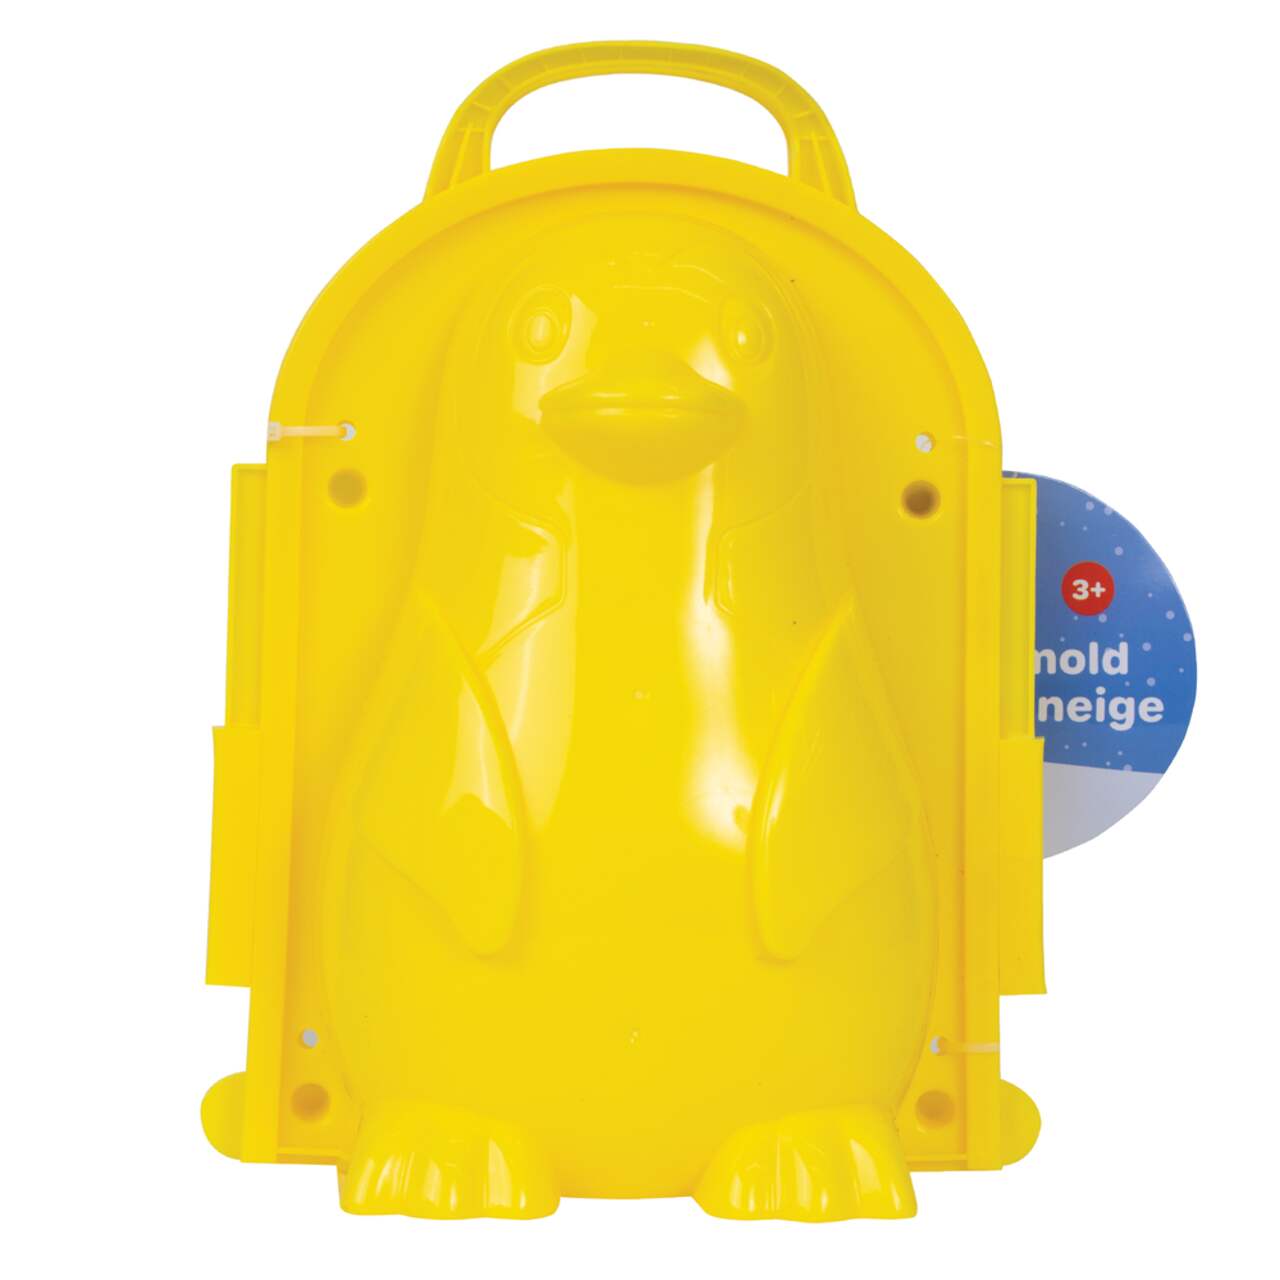 https://media-www.canadiantire.ca/product/playing/seasonal-recreation/winter-recreation/0821018/sno-buddy-snow-mold-3c1d331a-a0a0-4d3e-92ea-d6ef19ea2bc7.png?imdensity=1&imwidth=640&impolicy=mZoom